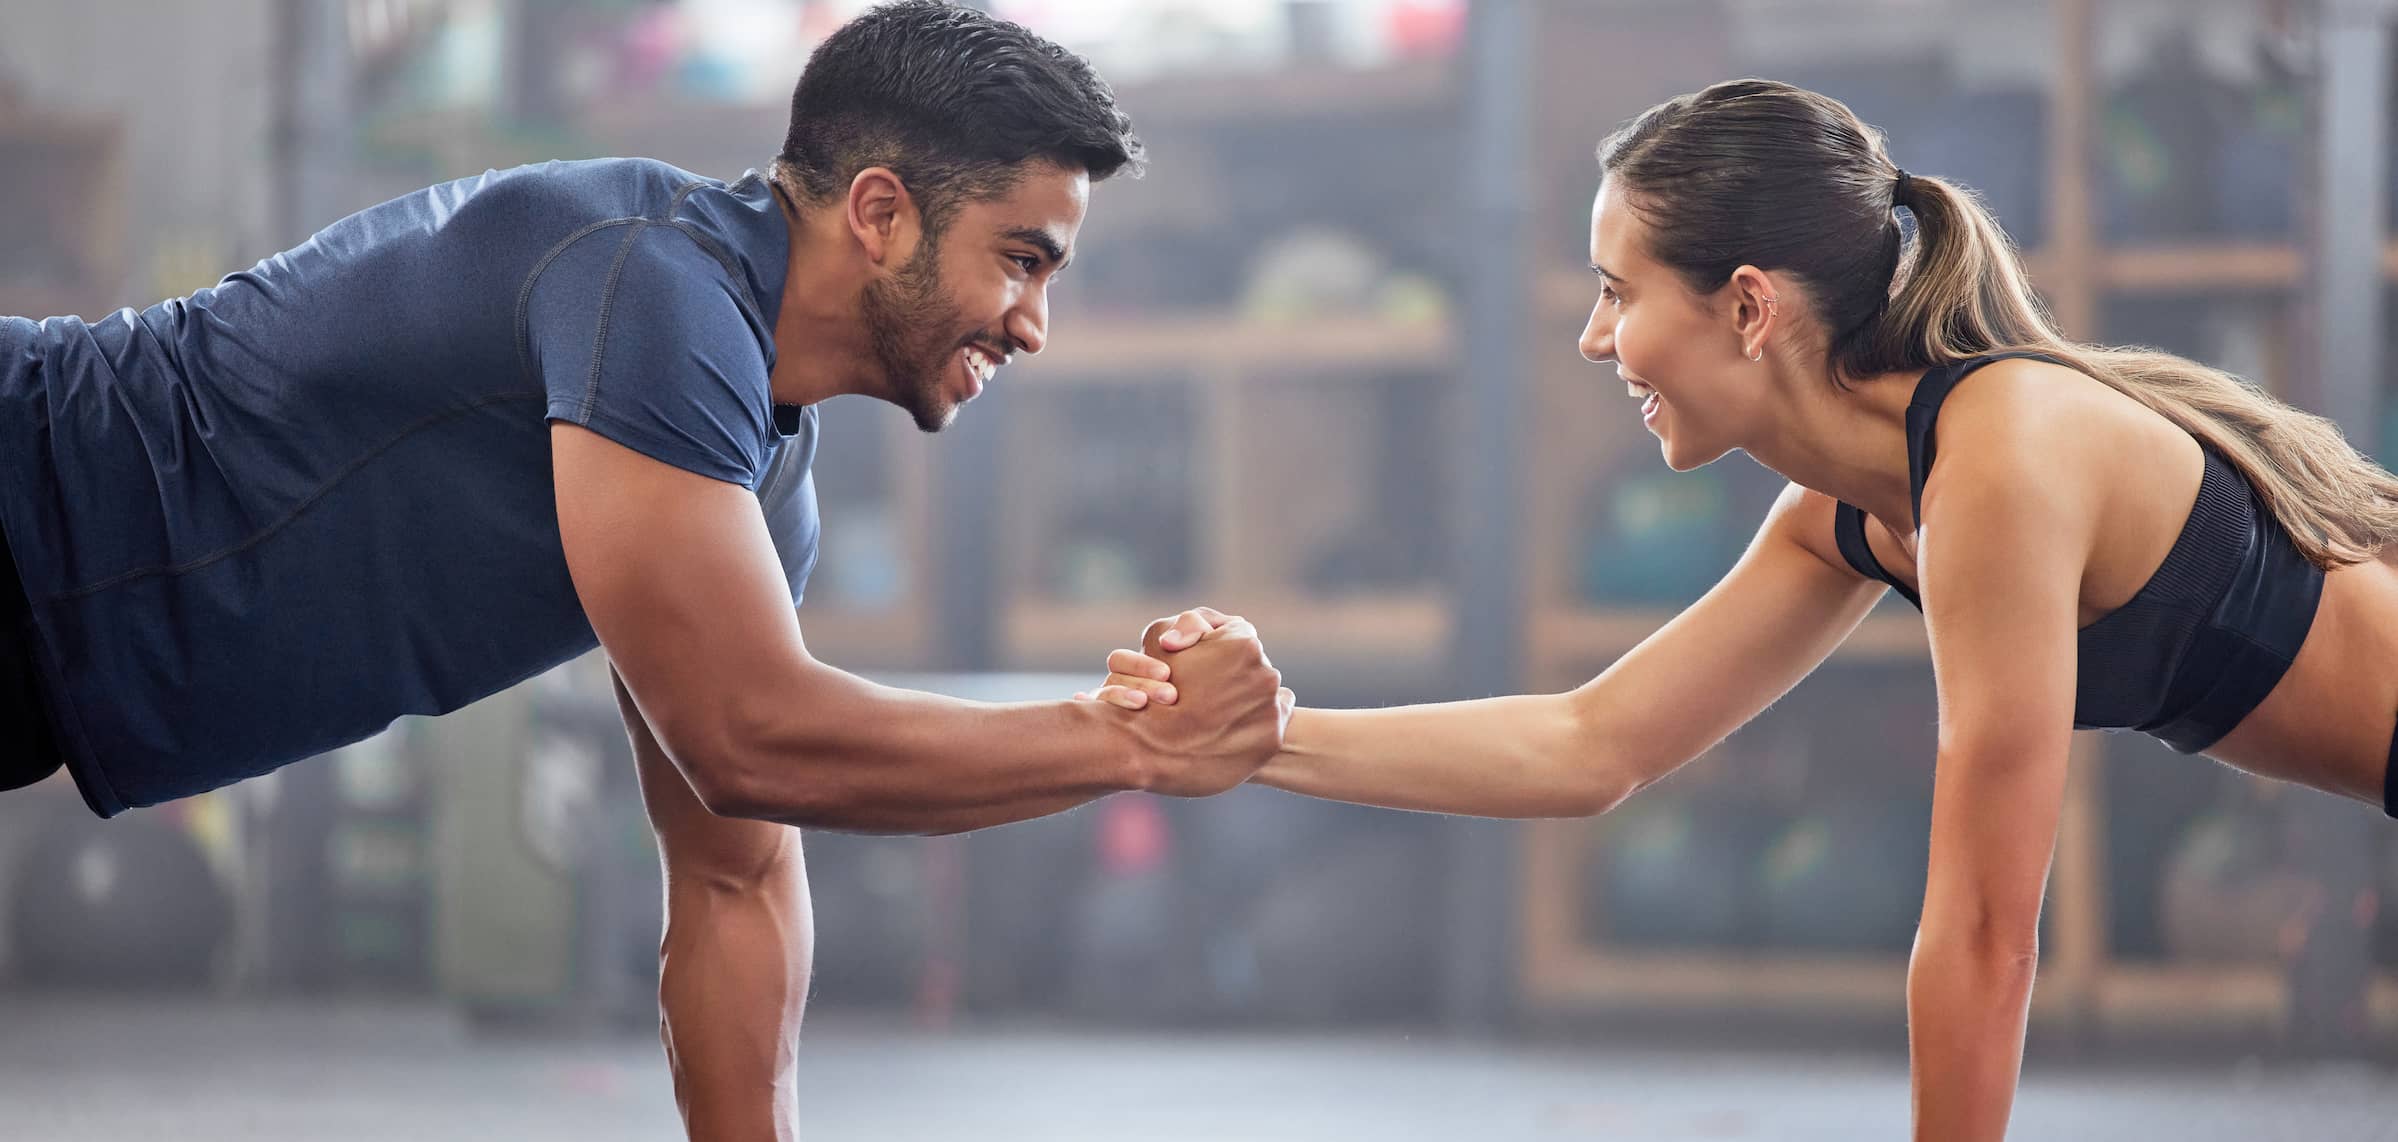 Fitness couple doing workout training